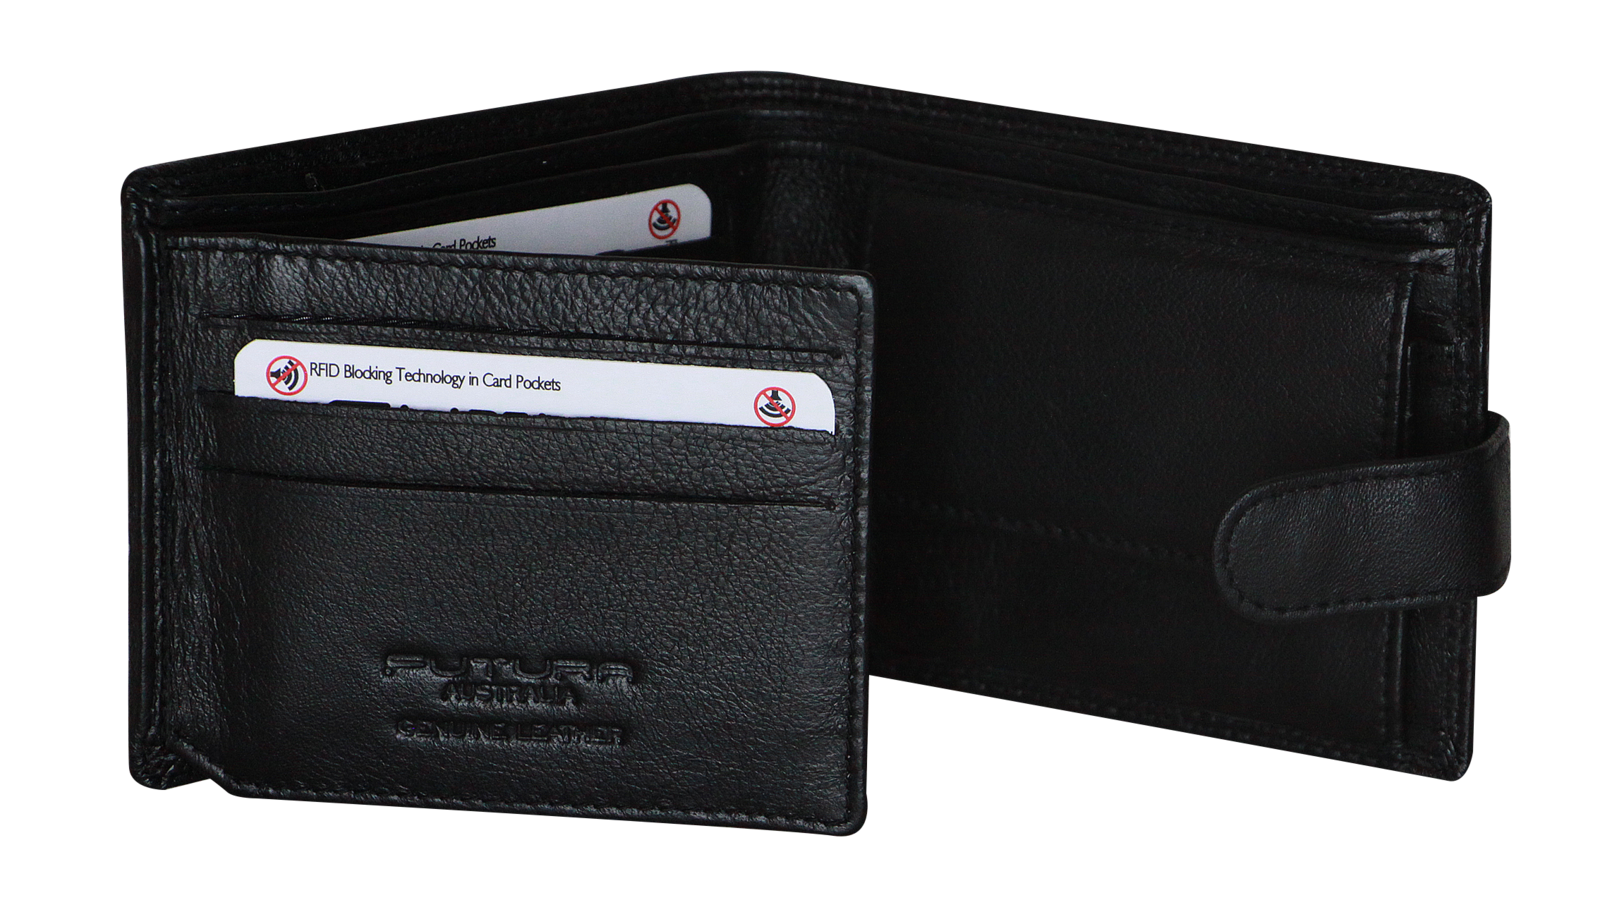 Futura Mens RFID Leather Coin Fold Over Wallet - Black